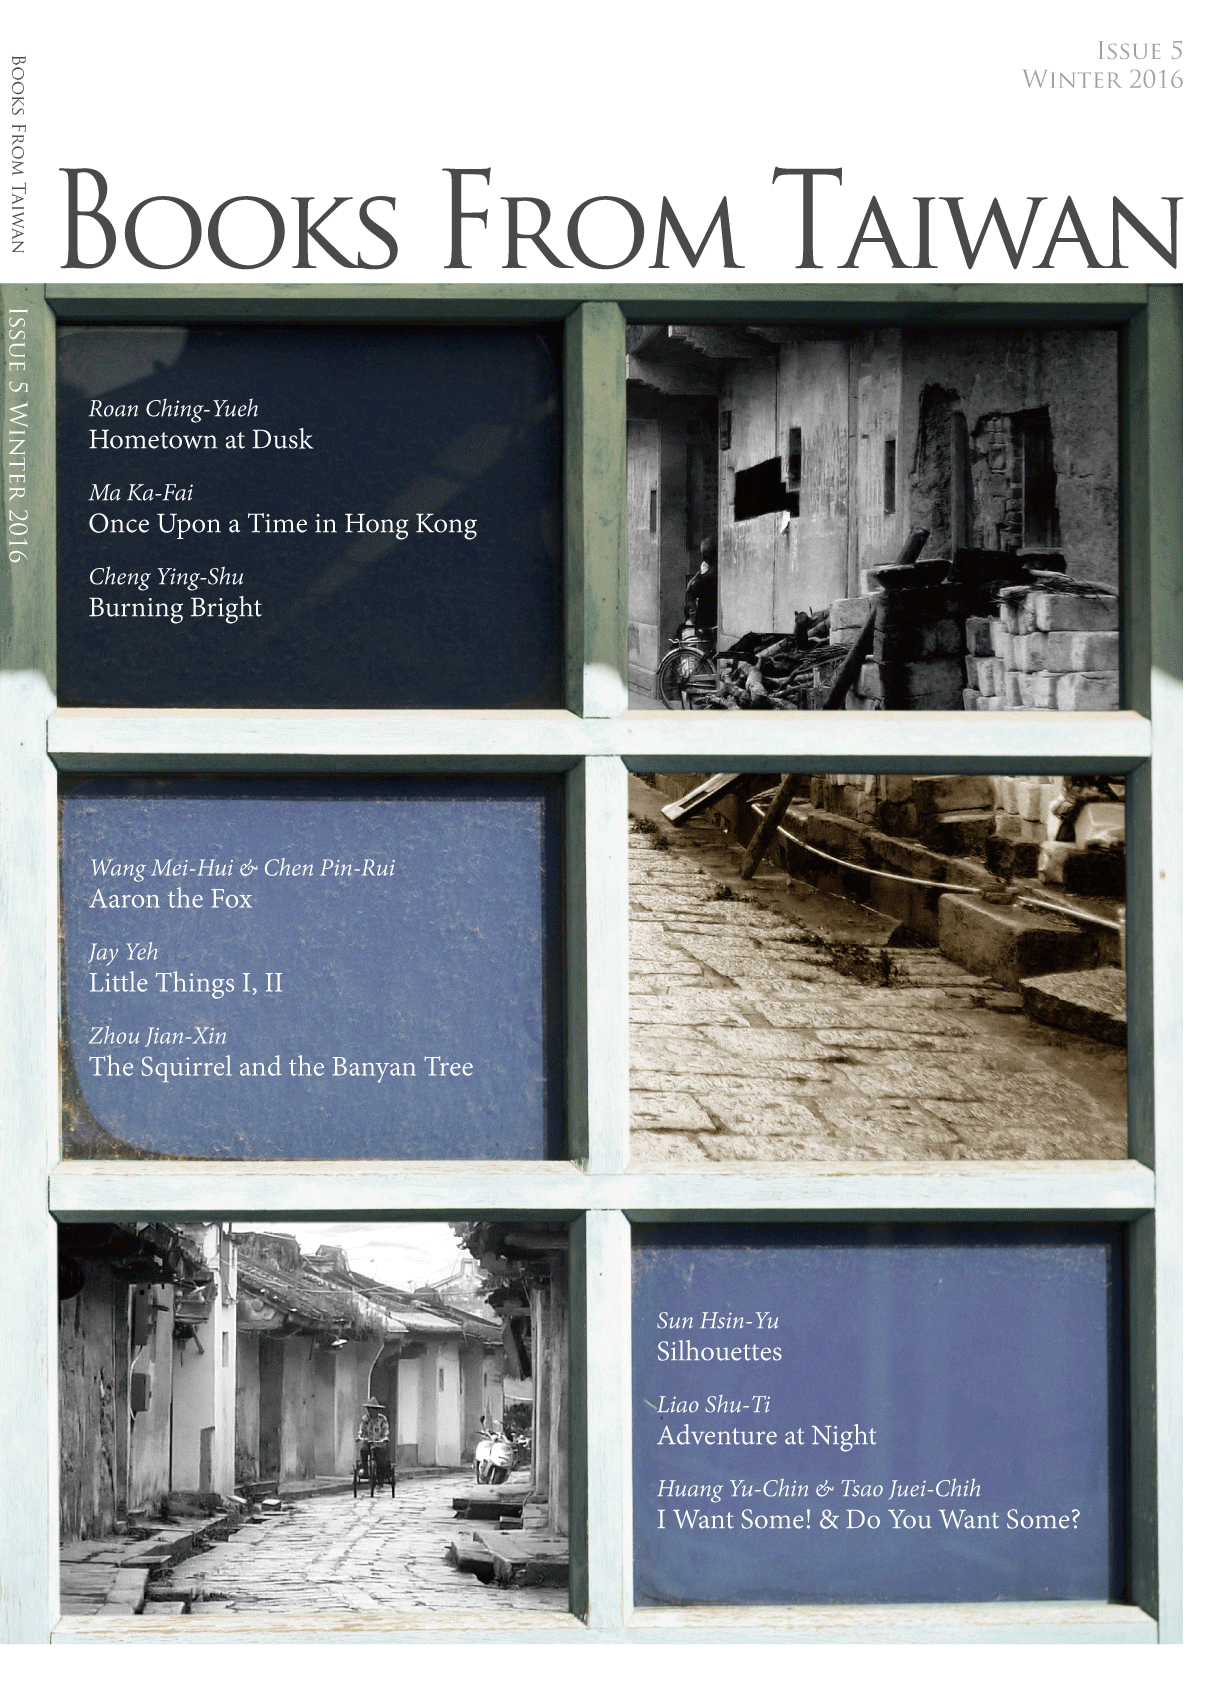 Books from Taiwan Issue 5